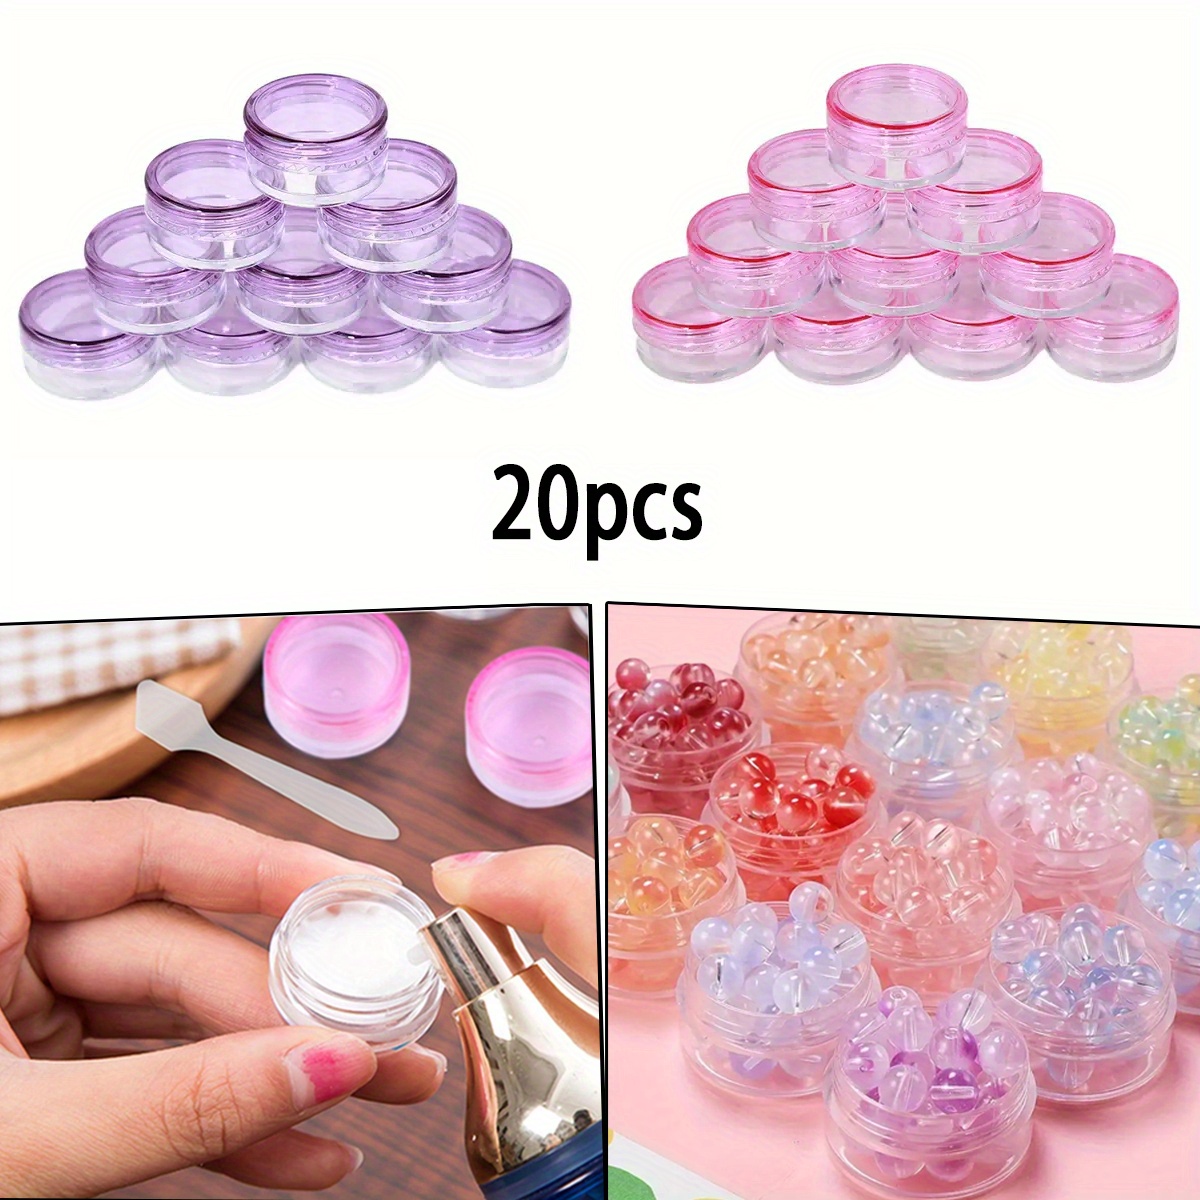 

20pcs Empty Clear Round Jars - 5g Travel Containers For Cosmetic, Lotion, Cream, Makeup, Bead, Eye Shadow, Rhinestone, Samples, Travel Essentials